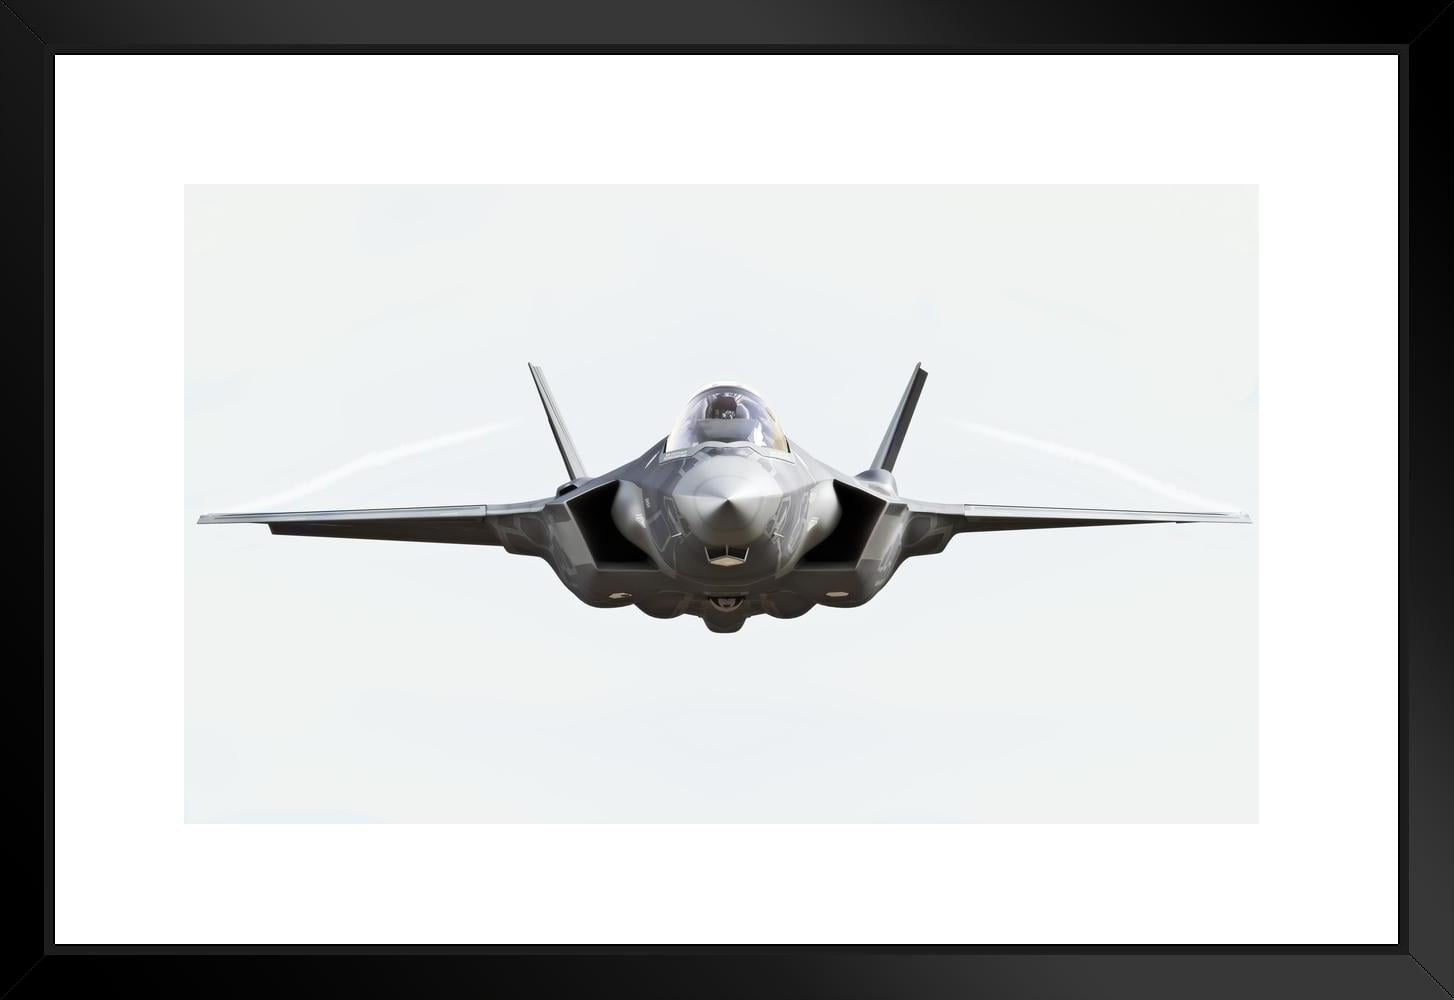 F35 Lightning Ii Fighter Jet Plane Front Isolated Photo Thick Paper Sign  Print Picture 12X8 - Walmart.com